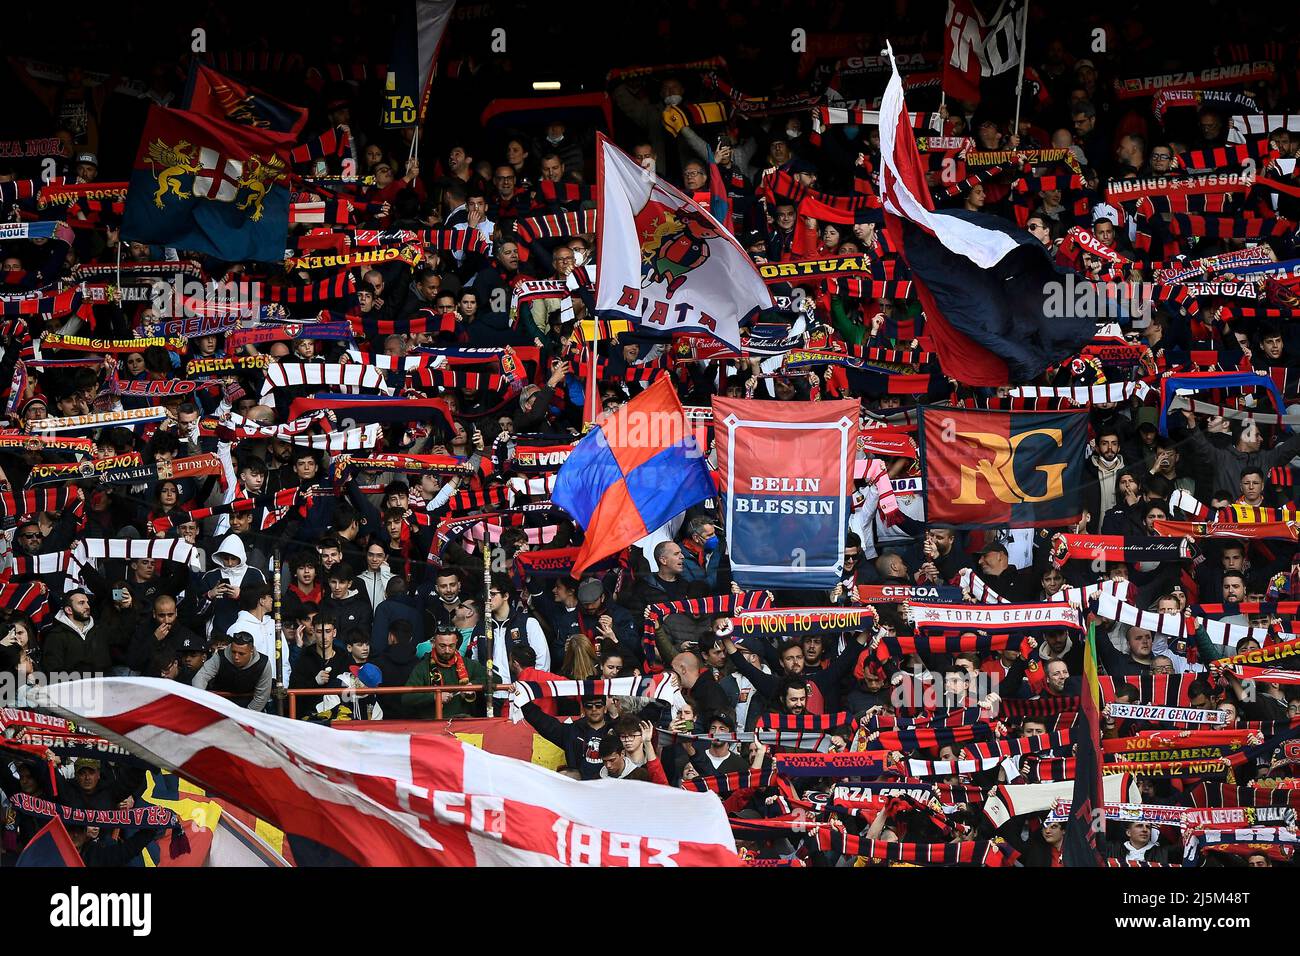 Genoa, Italy. 24 April 2022. Fans of Genoa CFC show their support prior to  the Serie